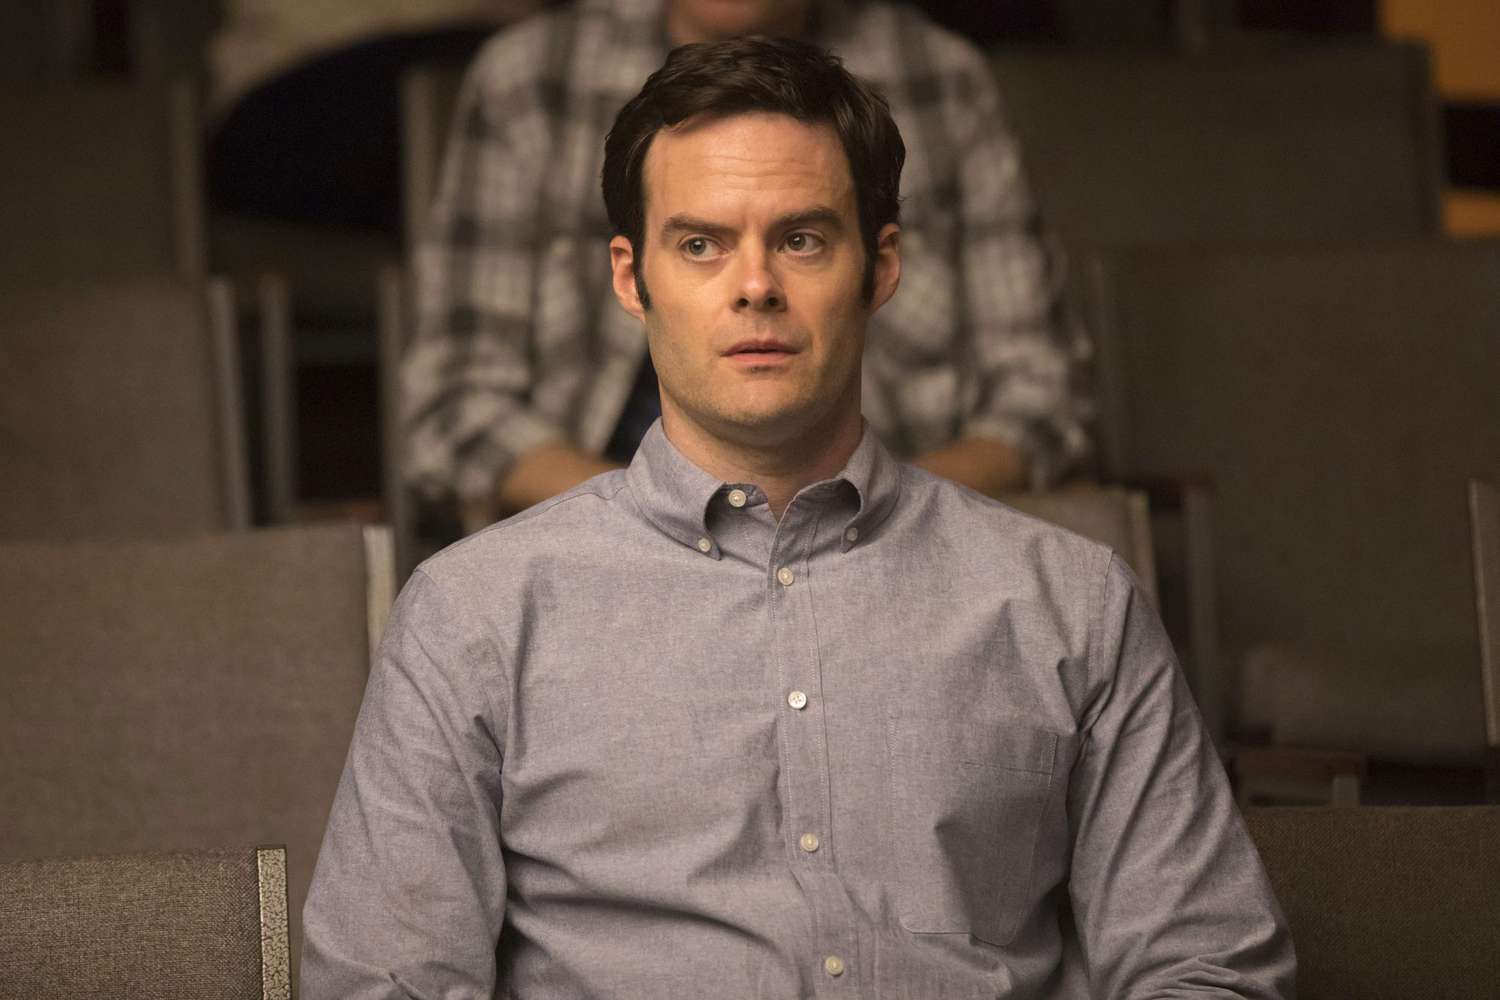 Bill Hader, Barry, Best Actor in a Comedy Series